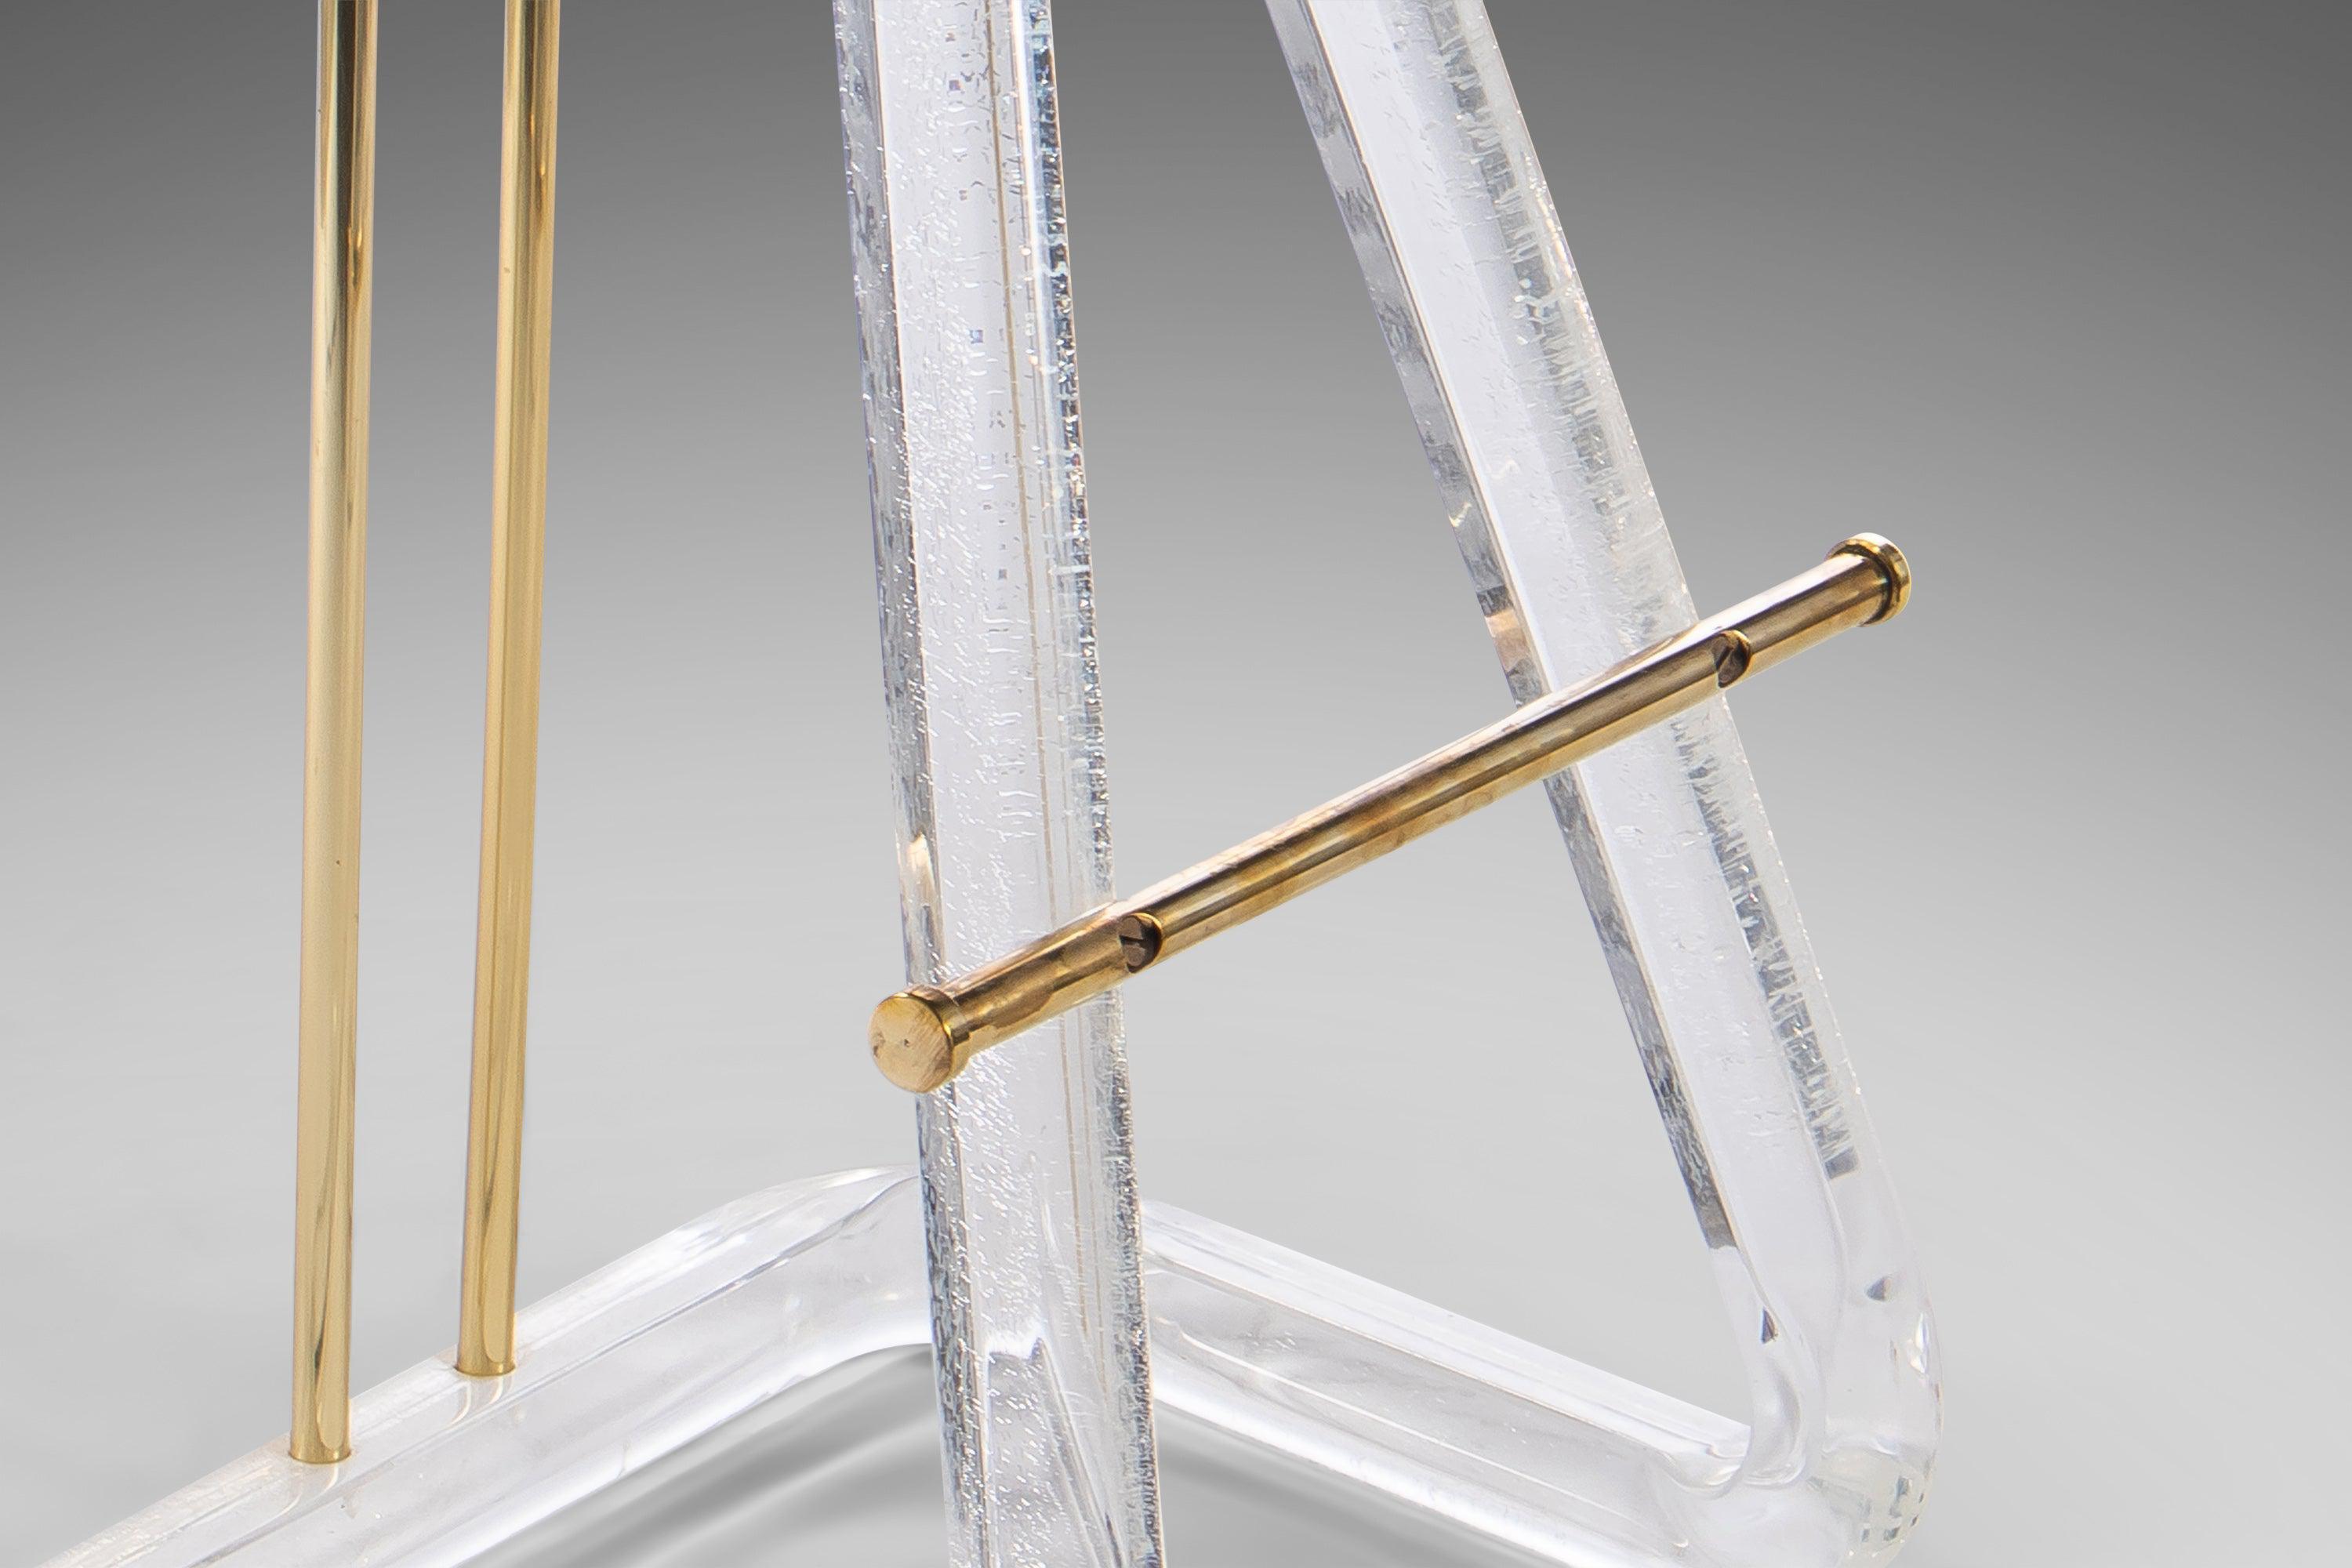 Late 20th Century Bar Stool / Drafting Stool in Lucite & Brass Attributed to Leon Frost, c. 1970s For Sale